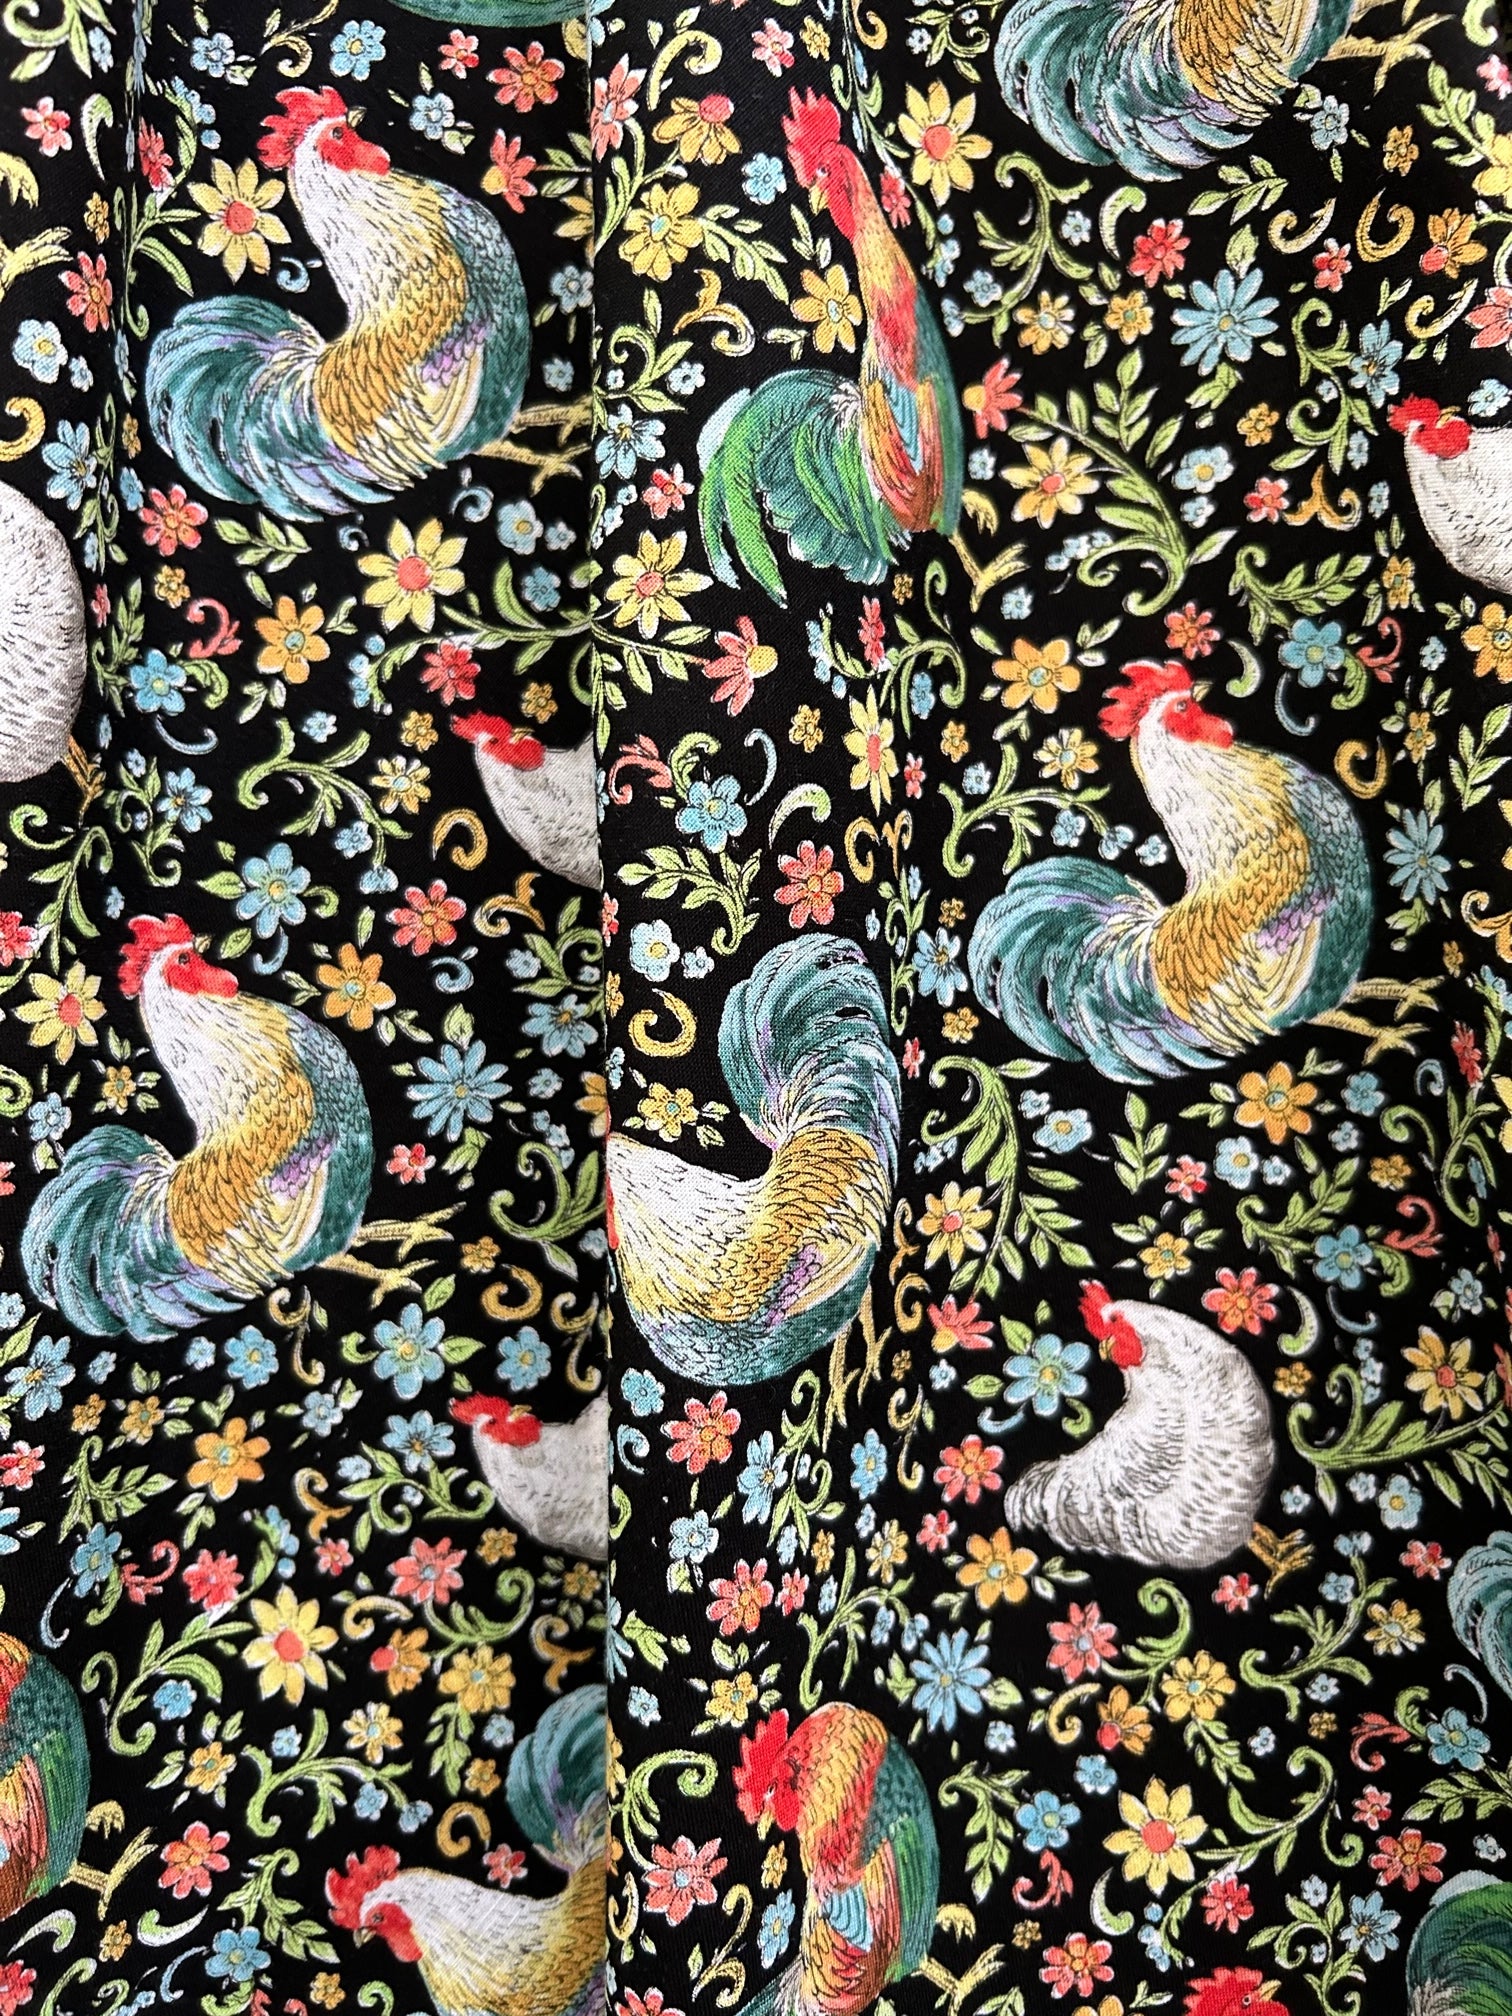 a close up of the fabric showing the chickens and roosters on a floral background